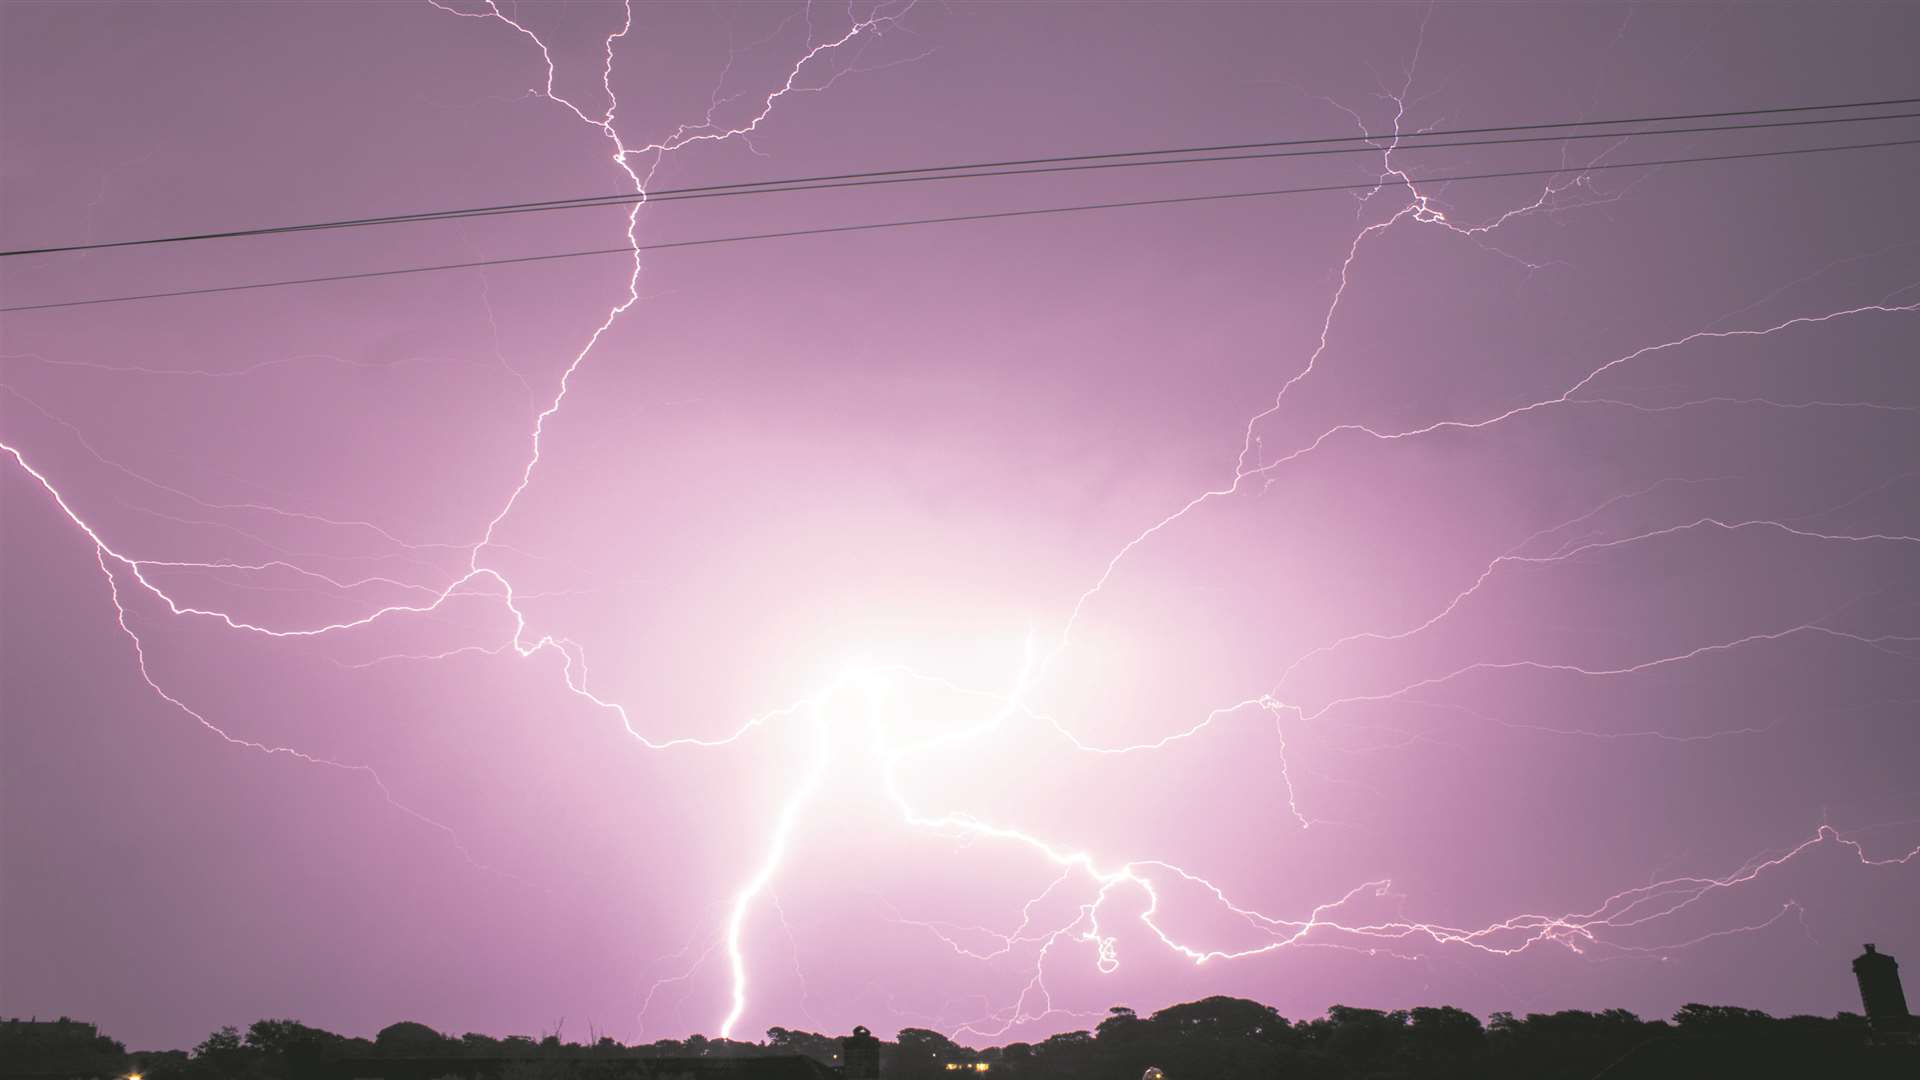 Loud thunder-claps were mistaken for explosions by Maidstone residents